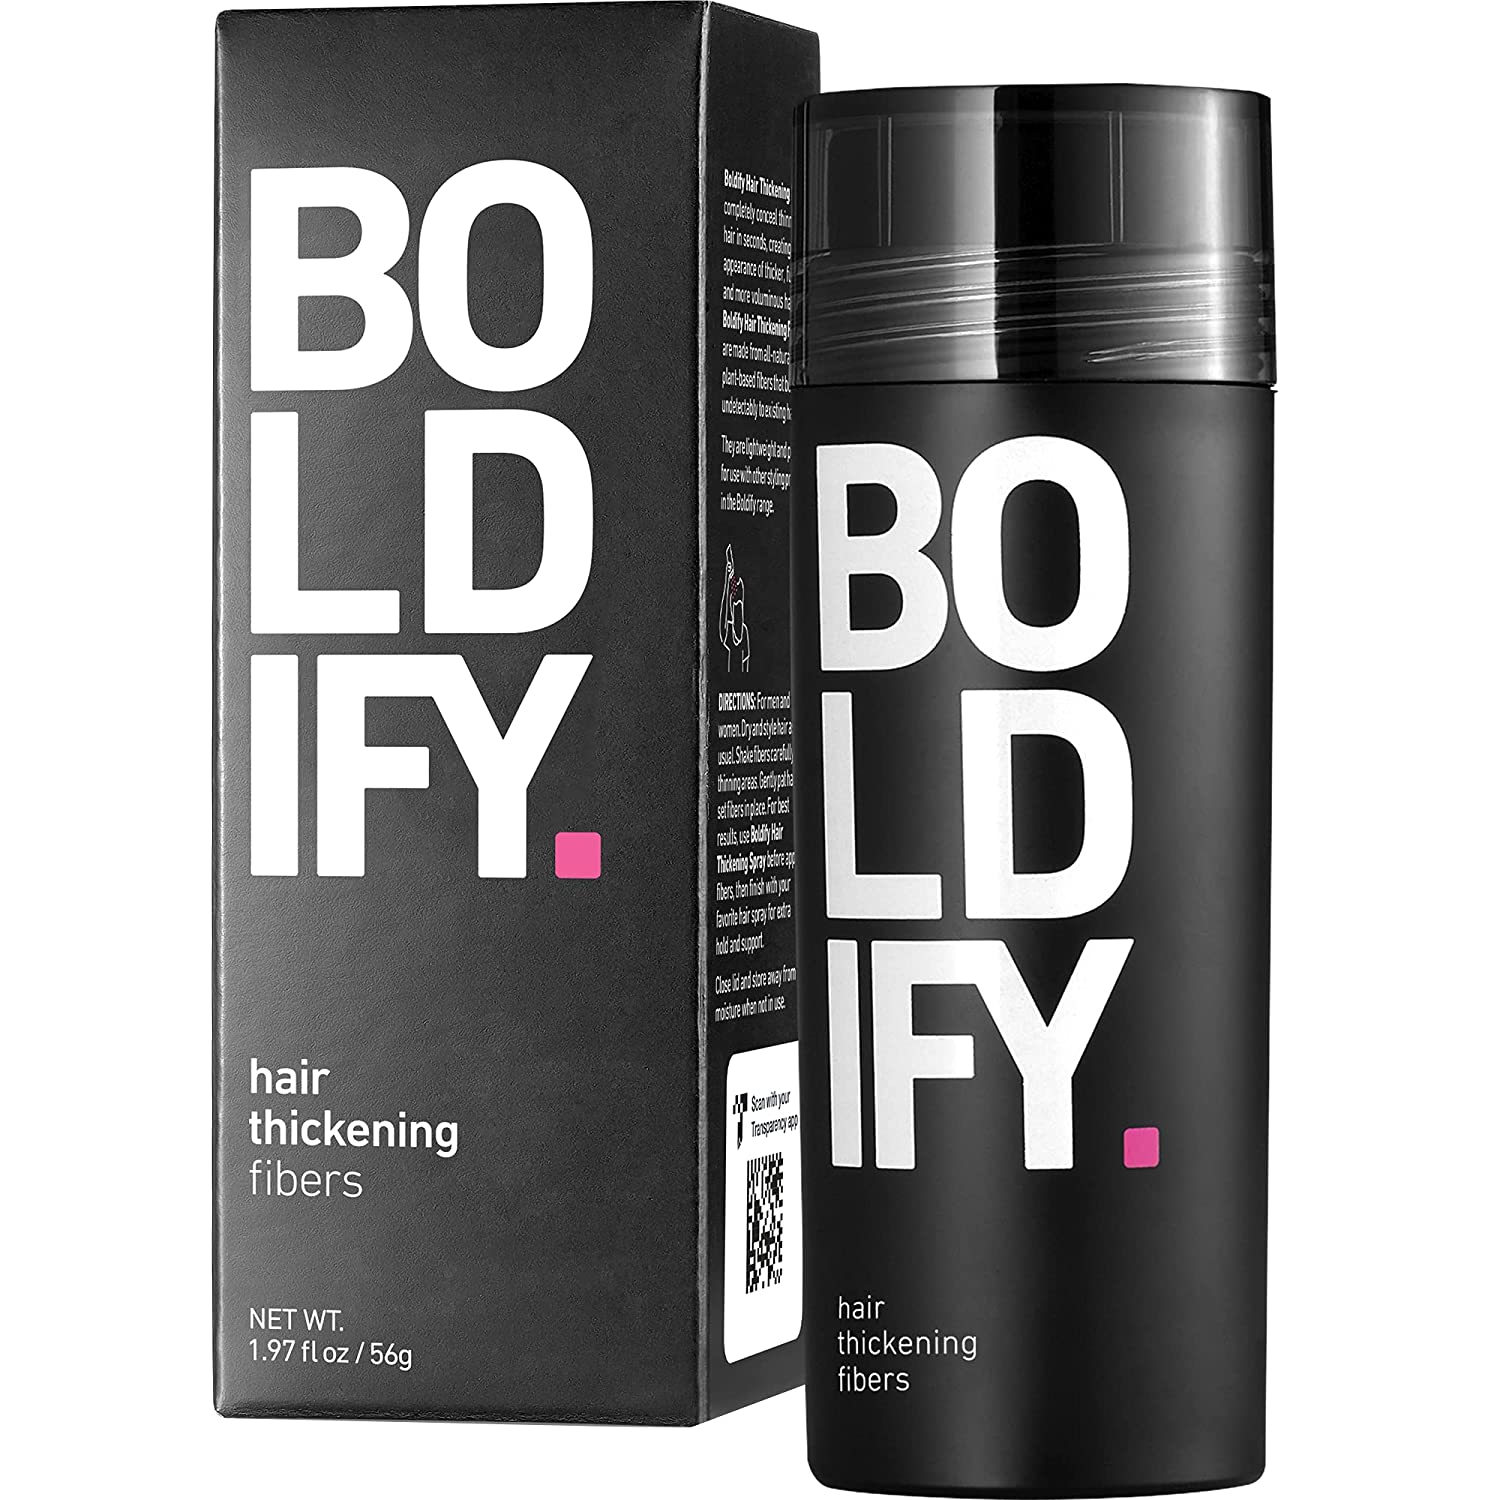 BOLDIFY Hair Fibers for Thinning Hair (BLACK) Undetectable - 56gr Bottle - Completely Conceals Hair Loss in 15 Sec - Hair Thickener for Fine Hair for Women & Men